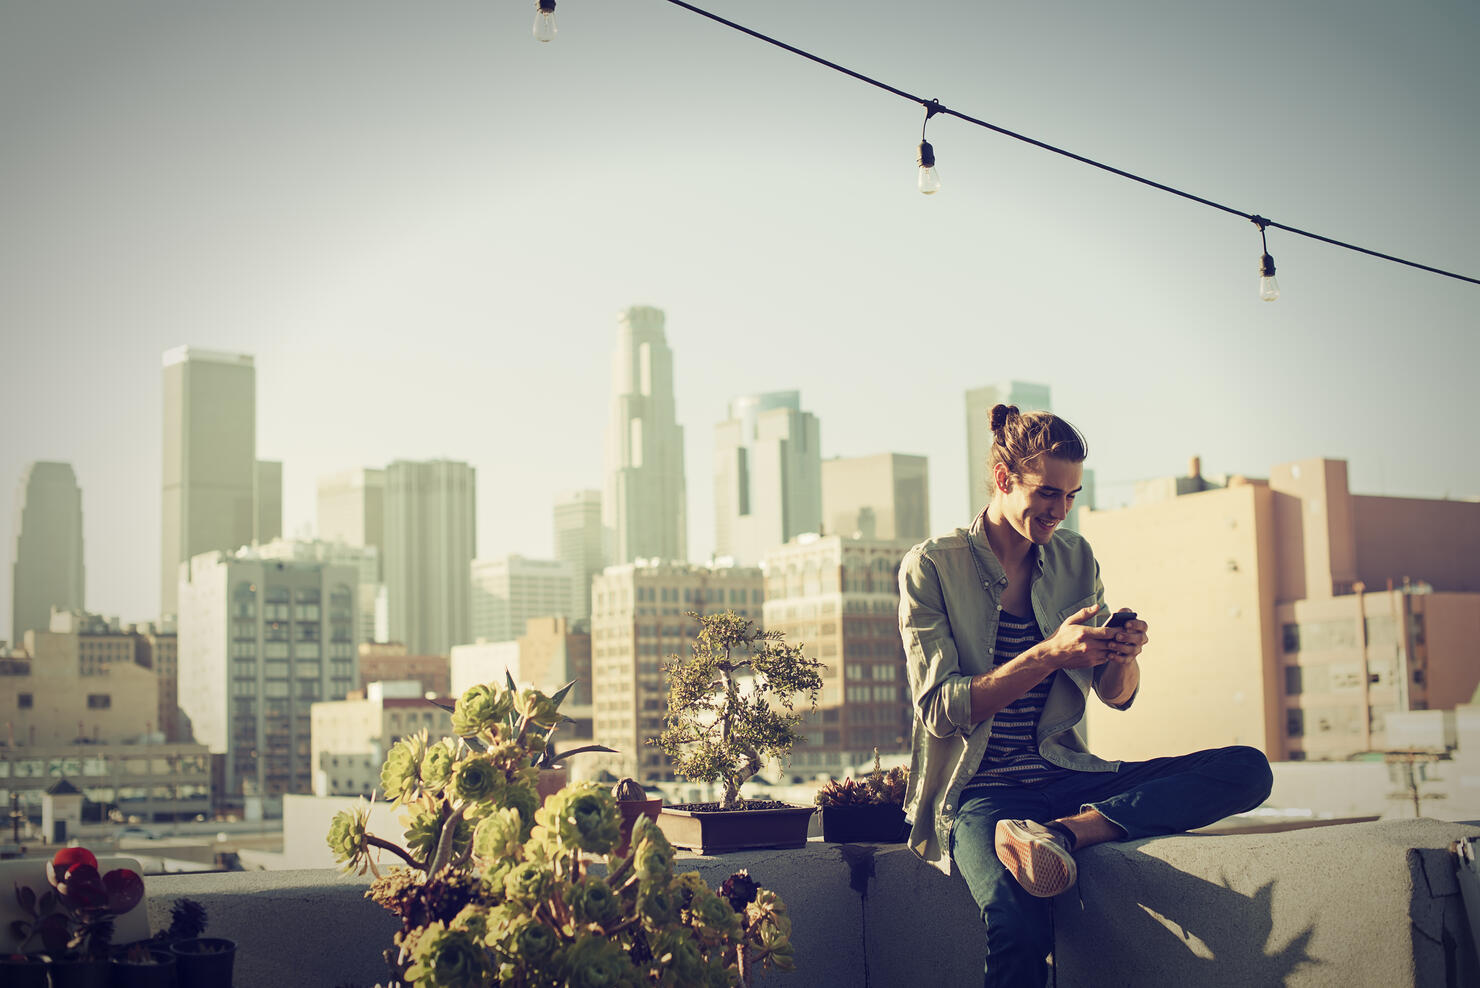 Young man checking his smartphone on urban rooftop